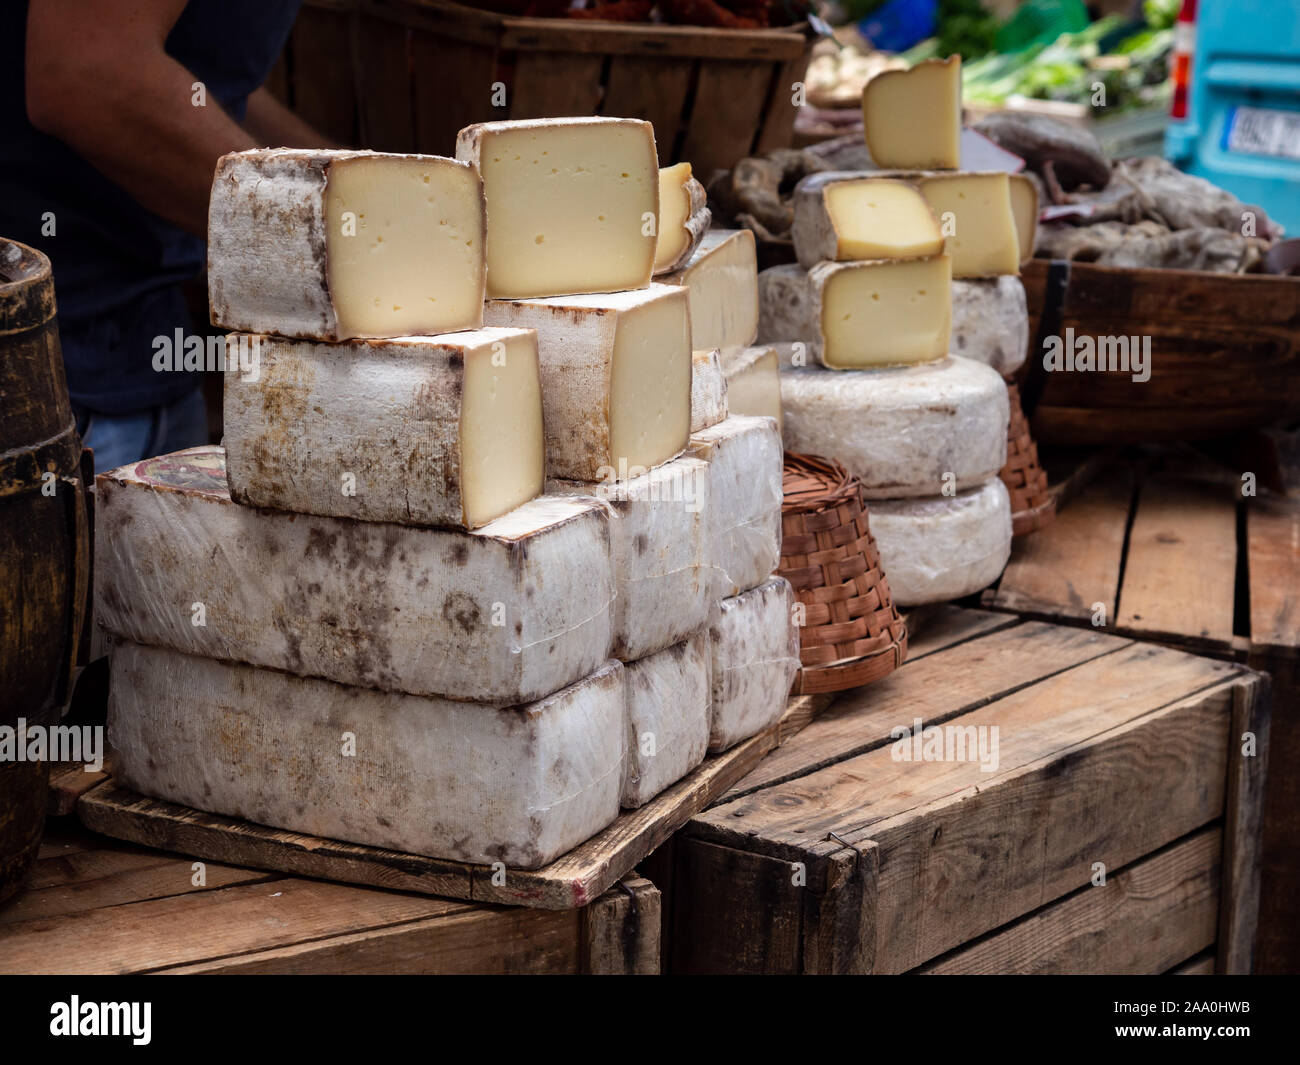 Cheese at street market in Arles, France Stock Photo